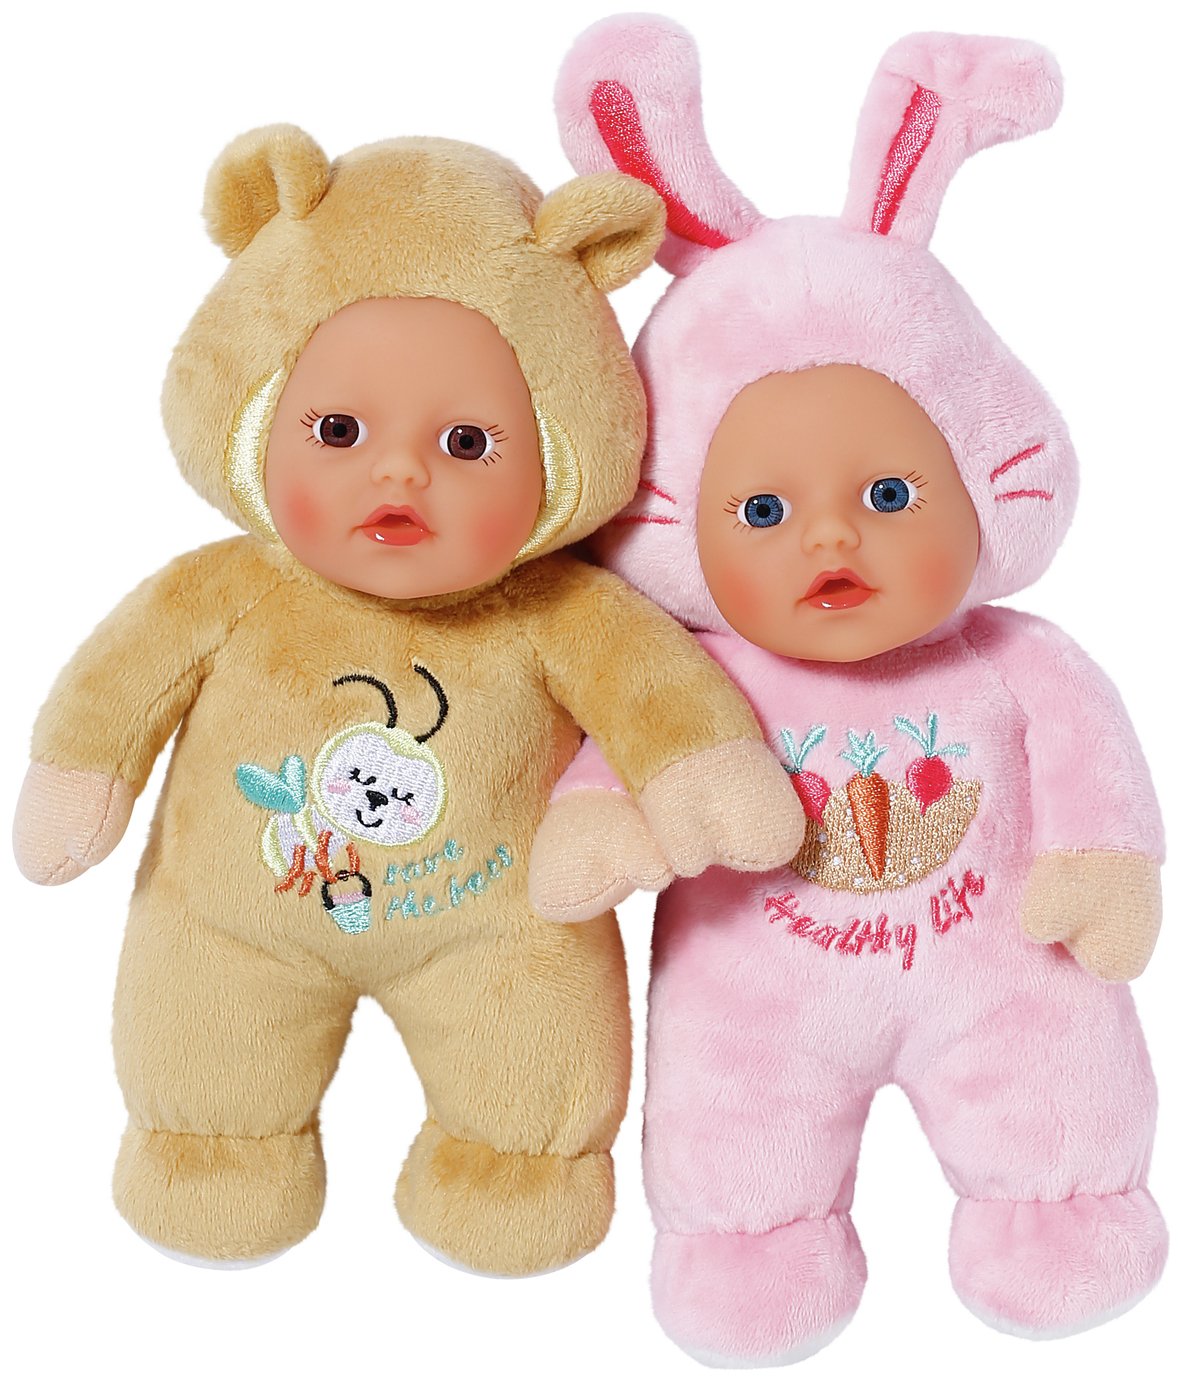 BABY born Cutie For Babies Doll - 8inch/21cm